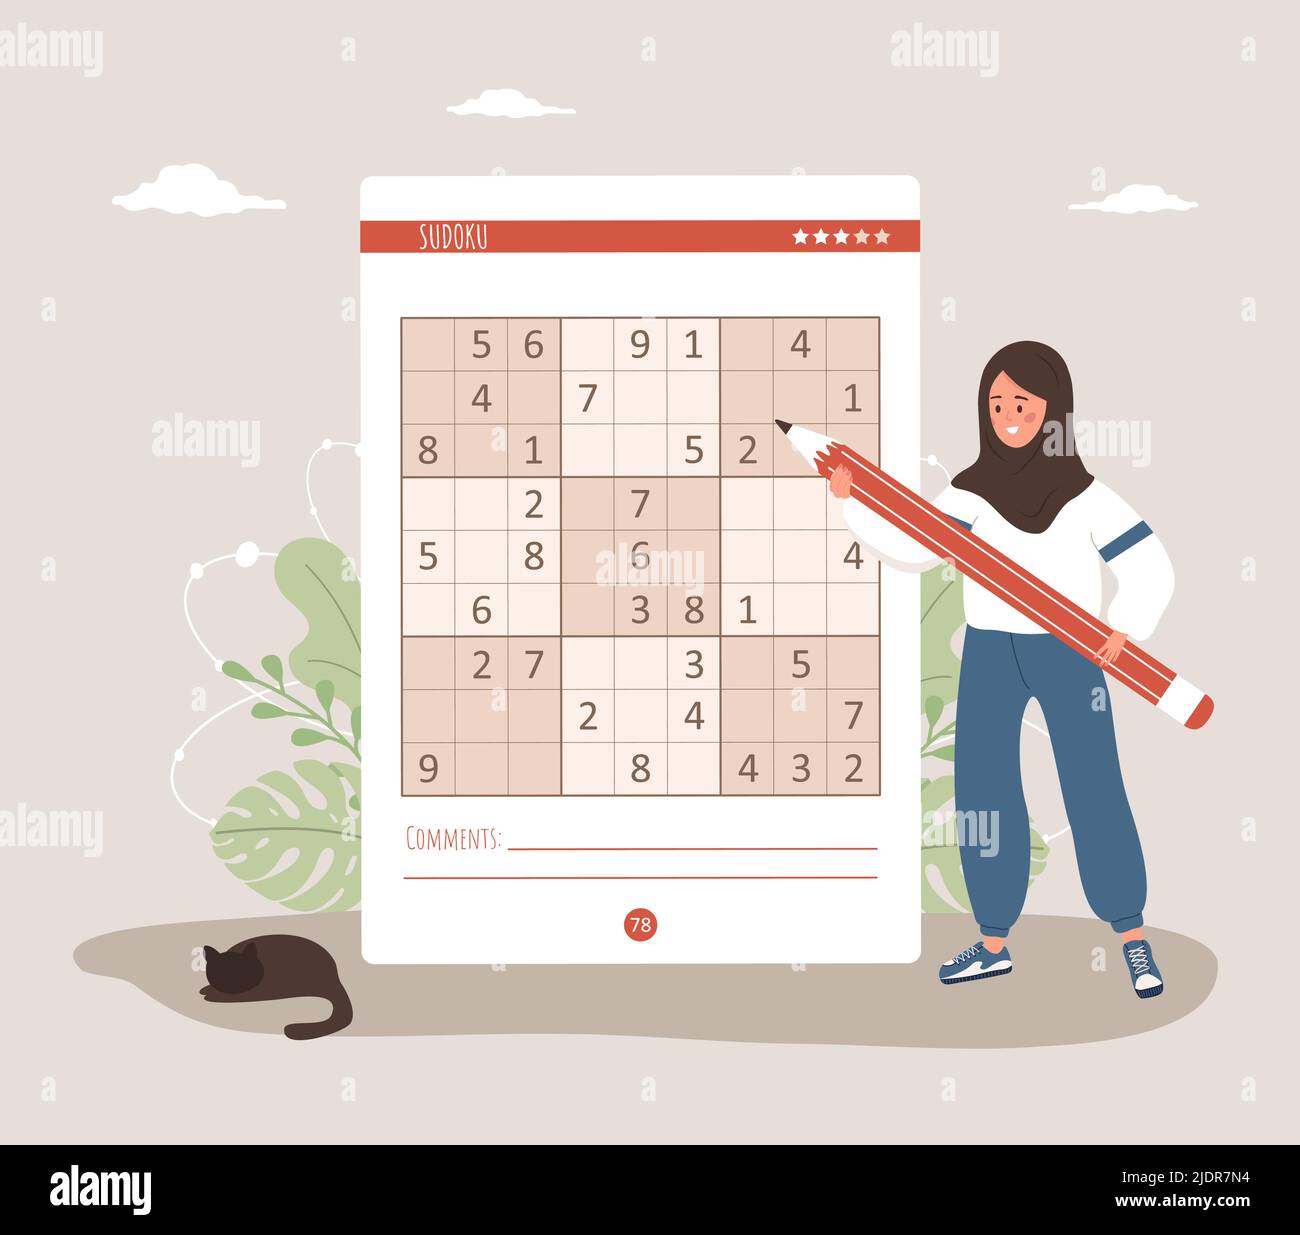 Sudoku game. Arabian woman with giant pencil solves crossword puzzle. Learning and leisure concept. Task for development of logical thinking and Stock Vector